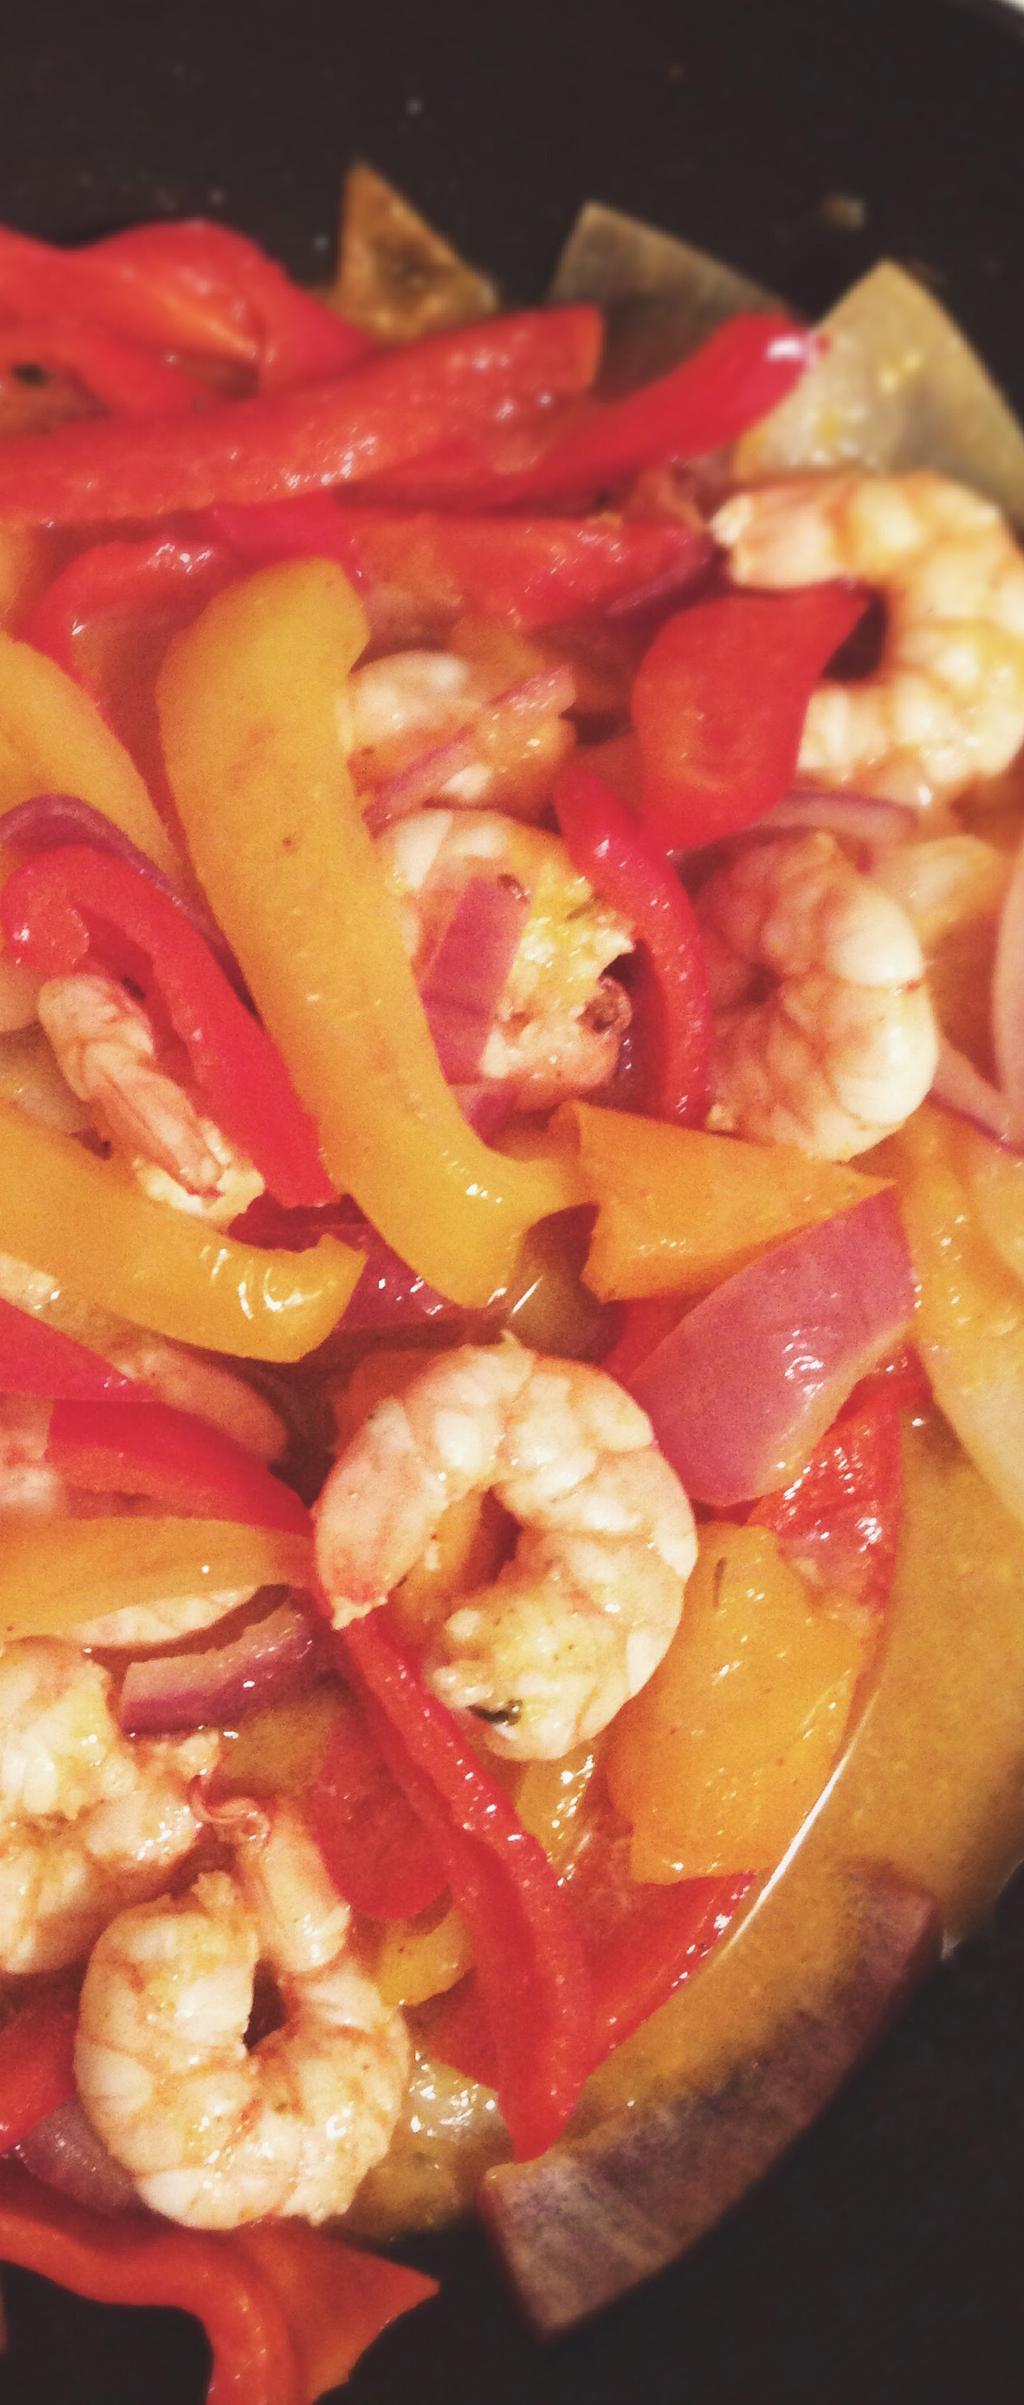 spicy shrimp fajitas Prep Time: 20 min Total Time: 20 min 20 medium frozen shrimp dash of hot sauce chopped lettuce 2 sliced bell peppers 4-6 small tortillas lime slices 1 sliced onion 1/2 cups